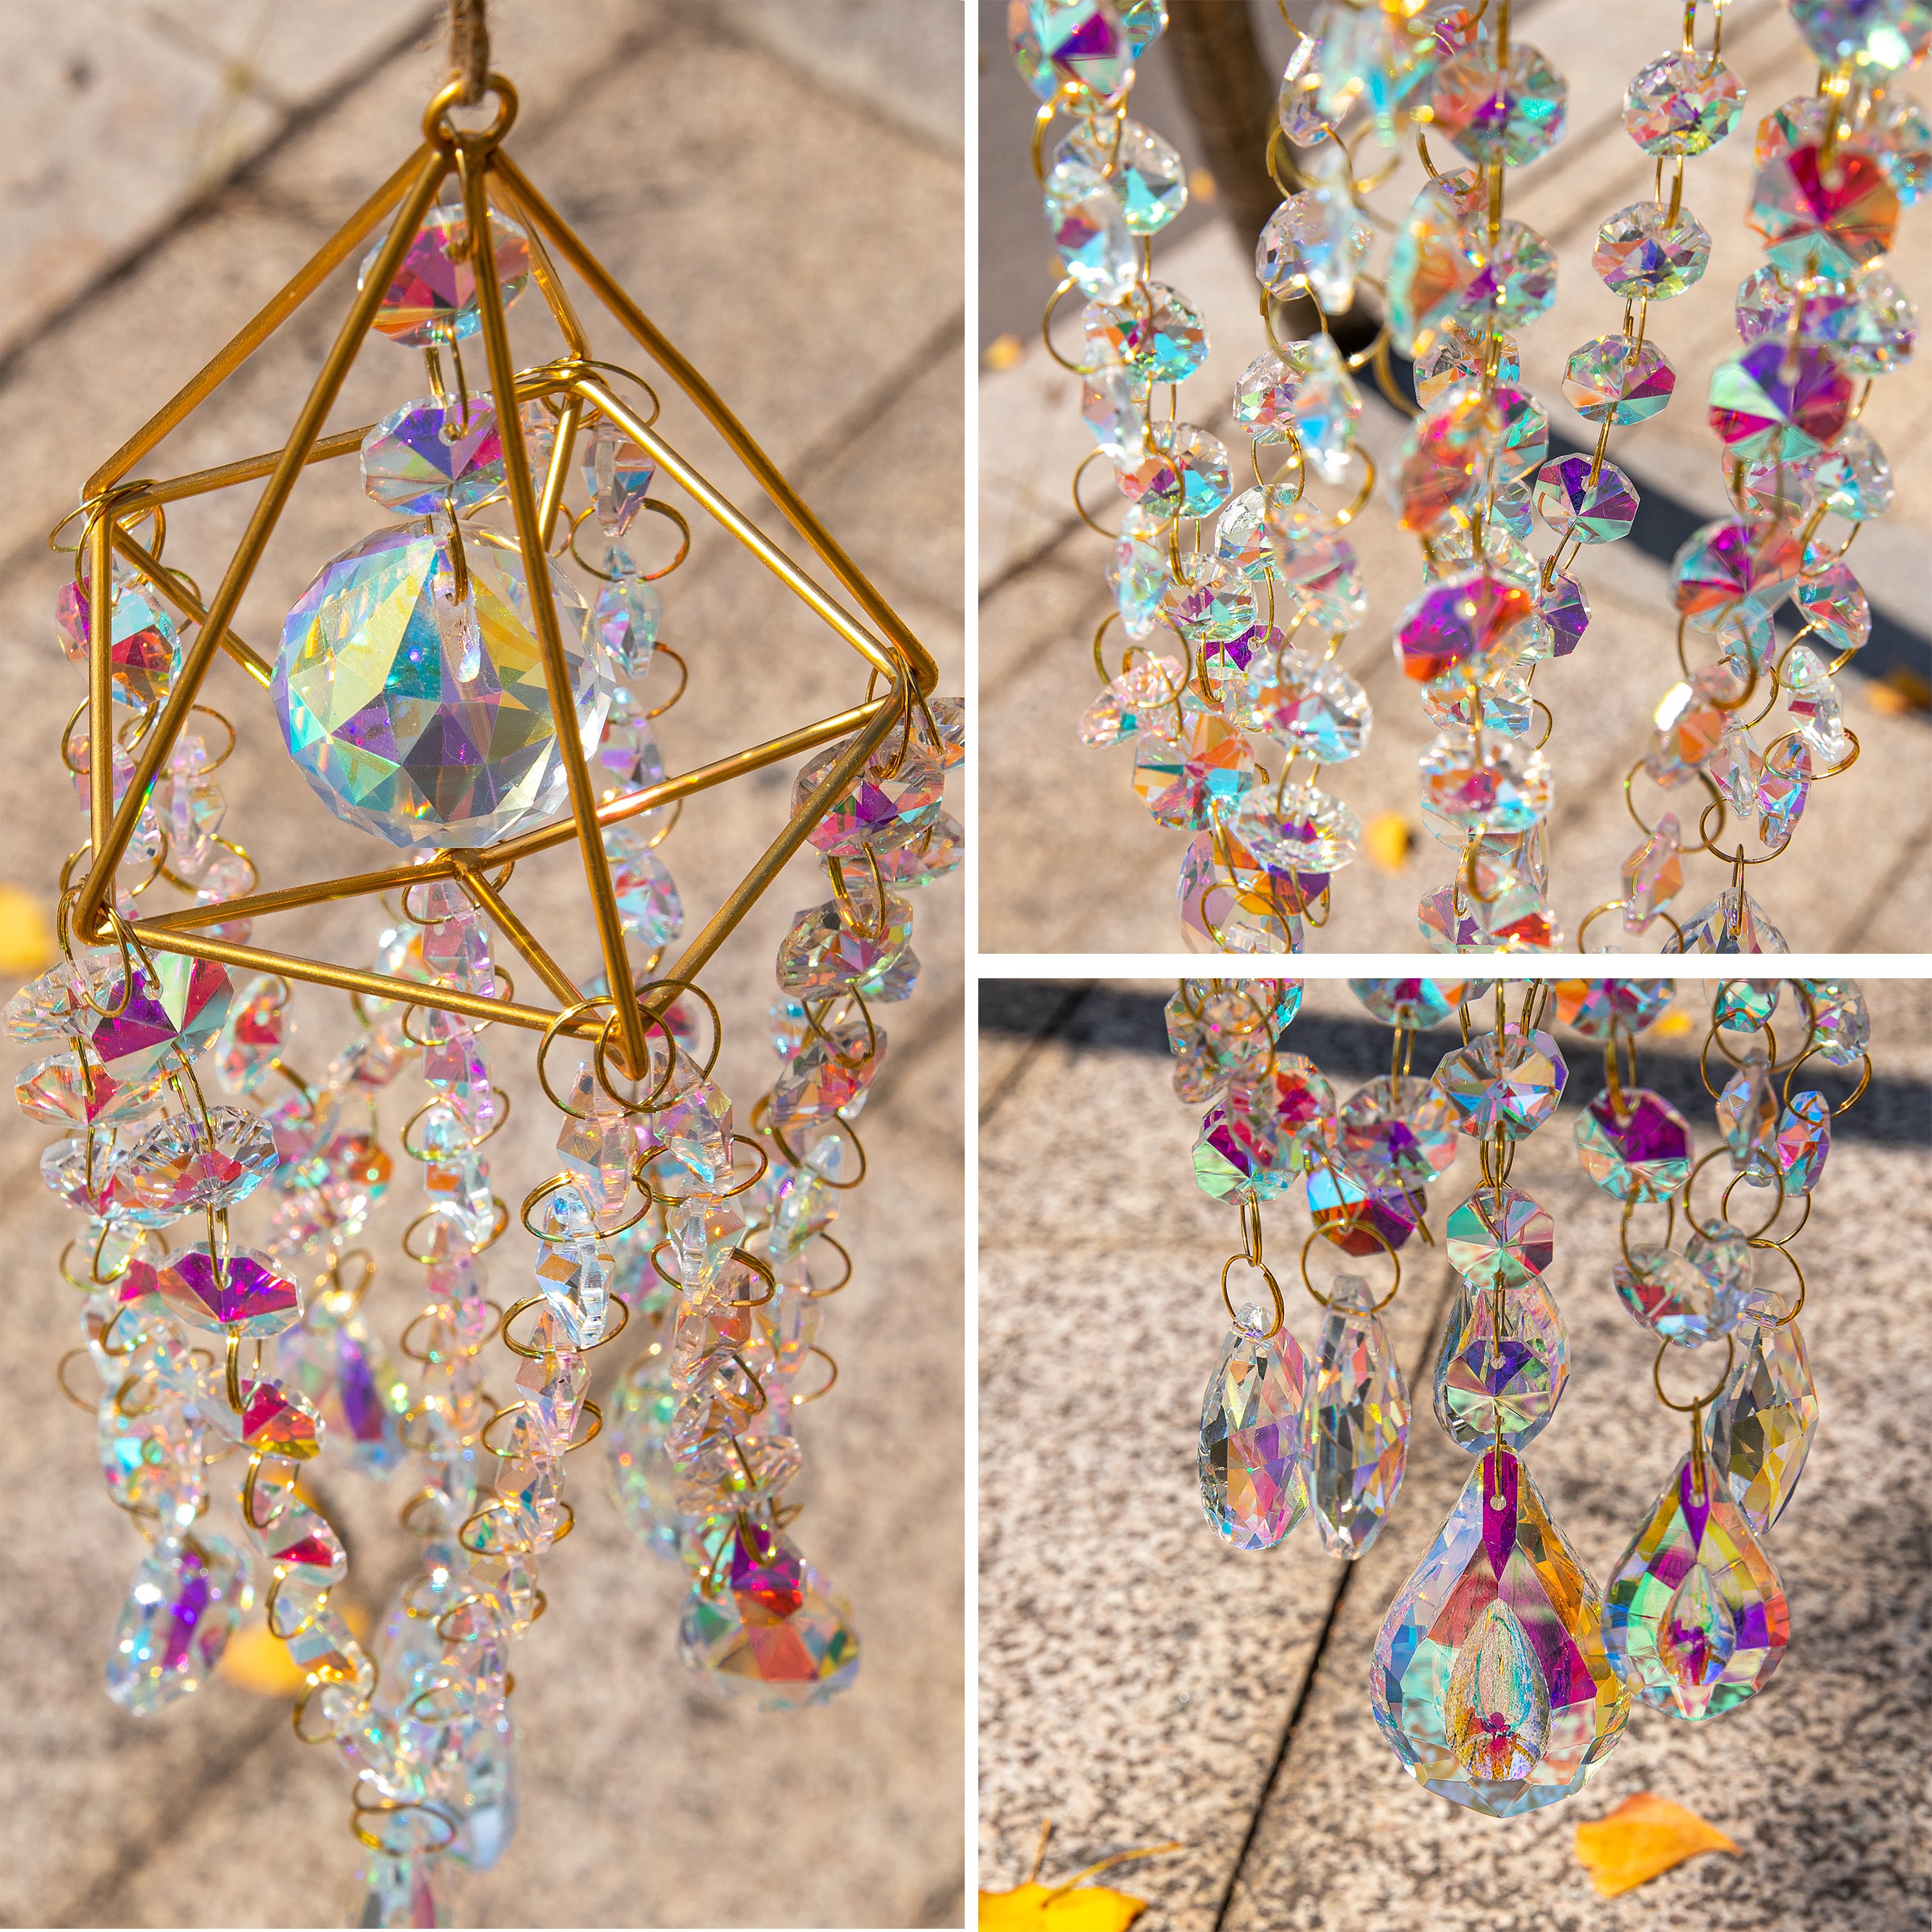 GANAZONO Crystal Wind Chime Decoration Garden Crystal Ornaments Crystal  suncatcher Sun Catchers Prism Boho Hanging Light Hanging Crystals for